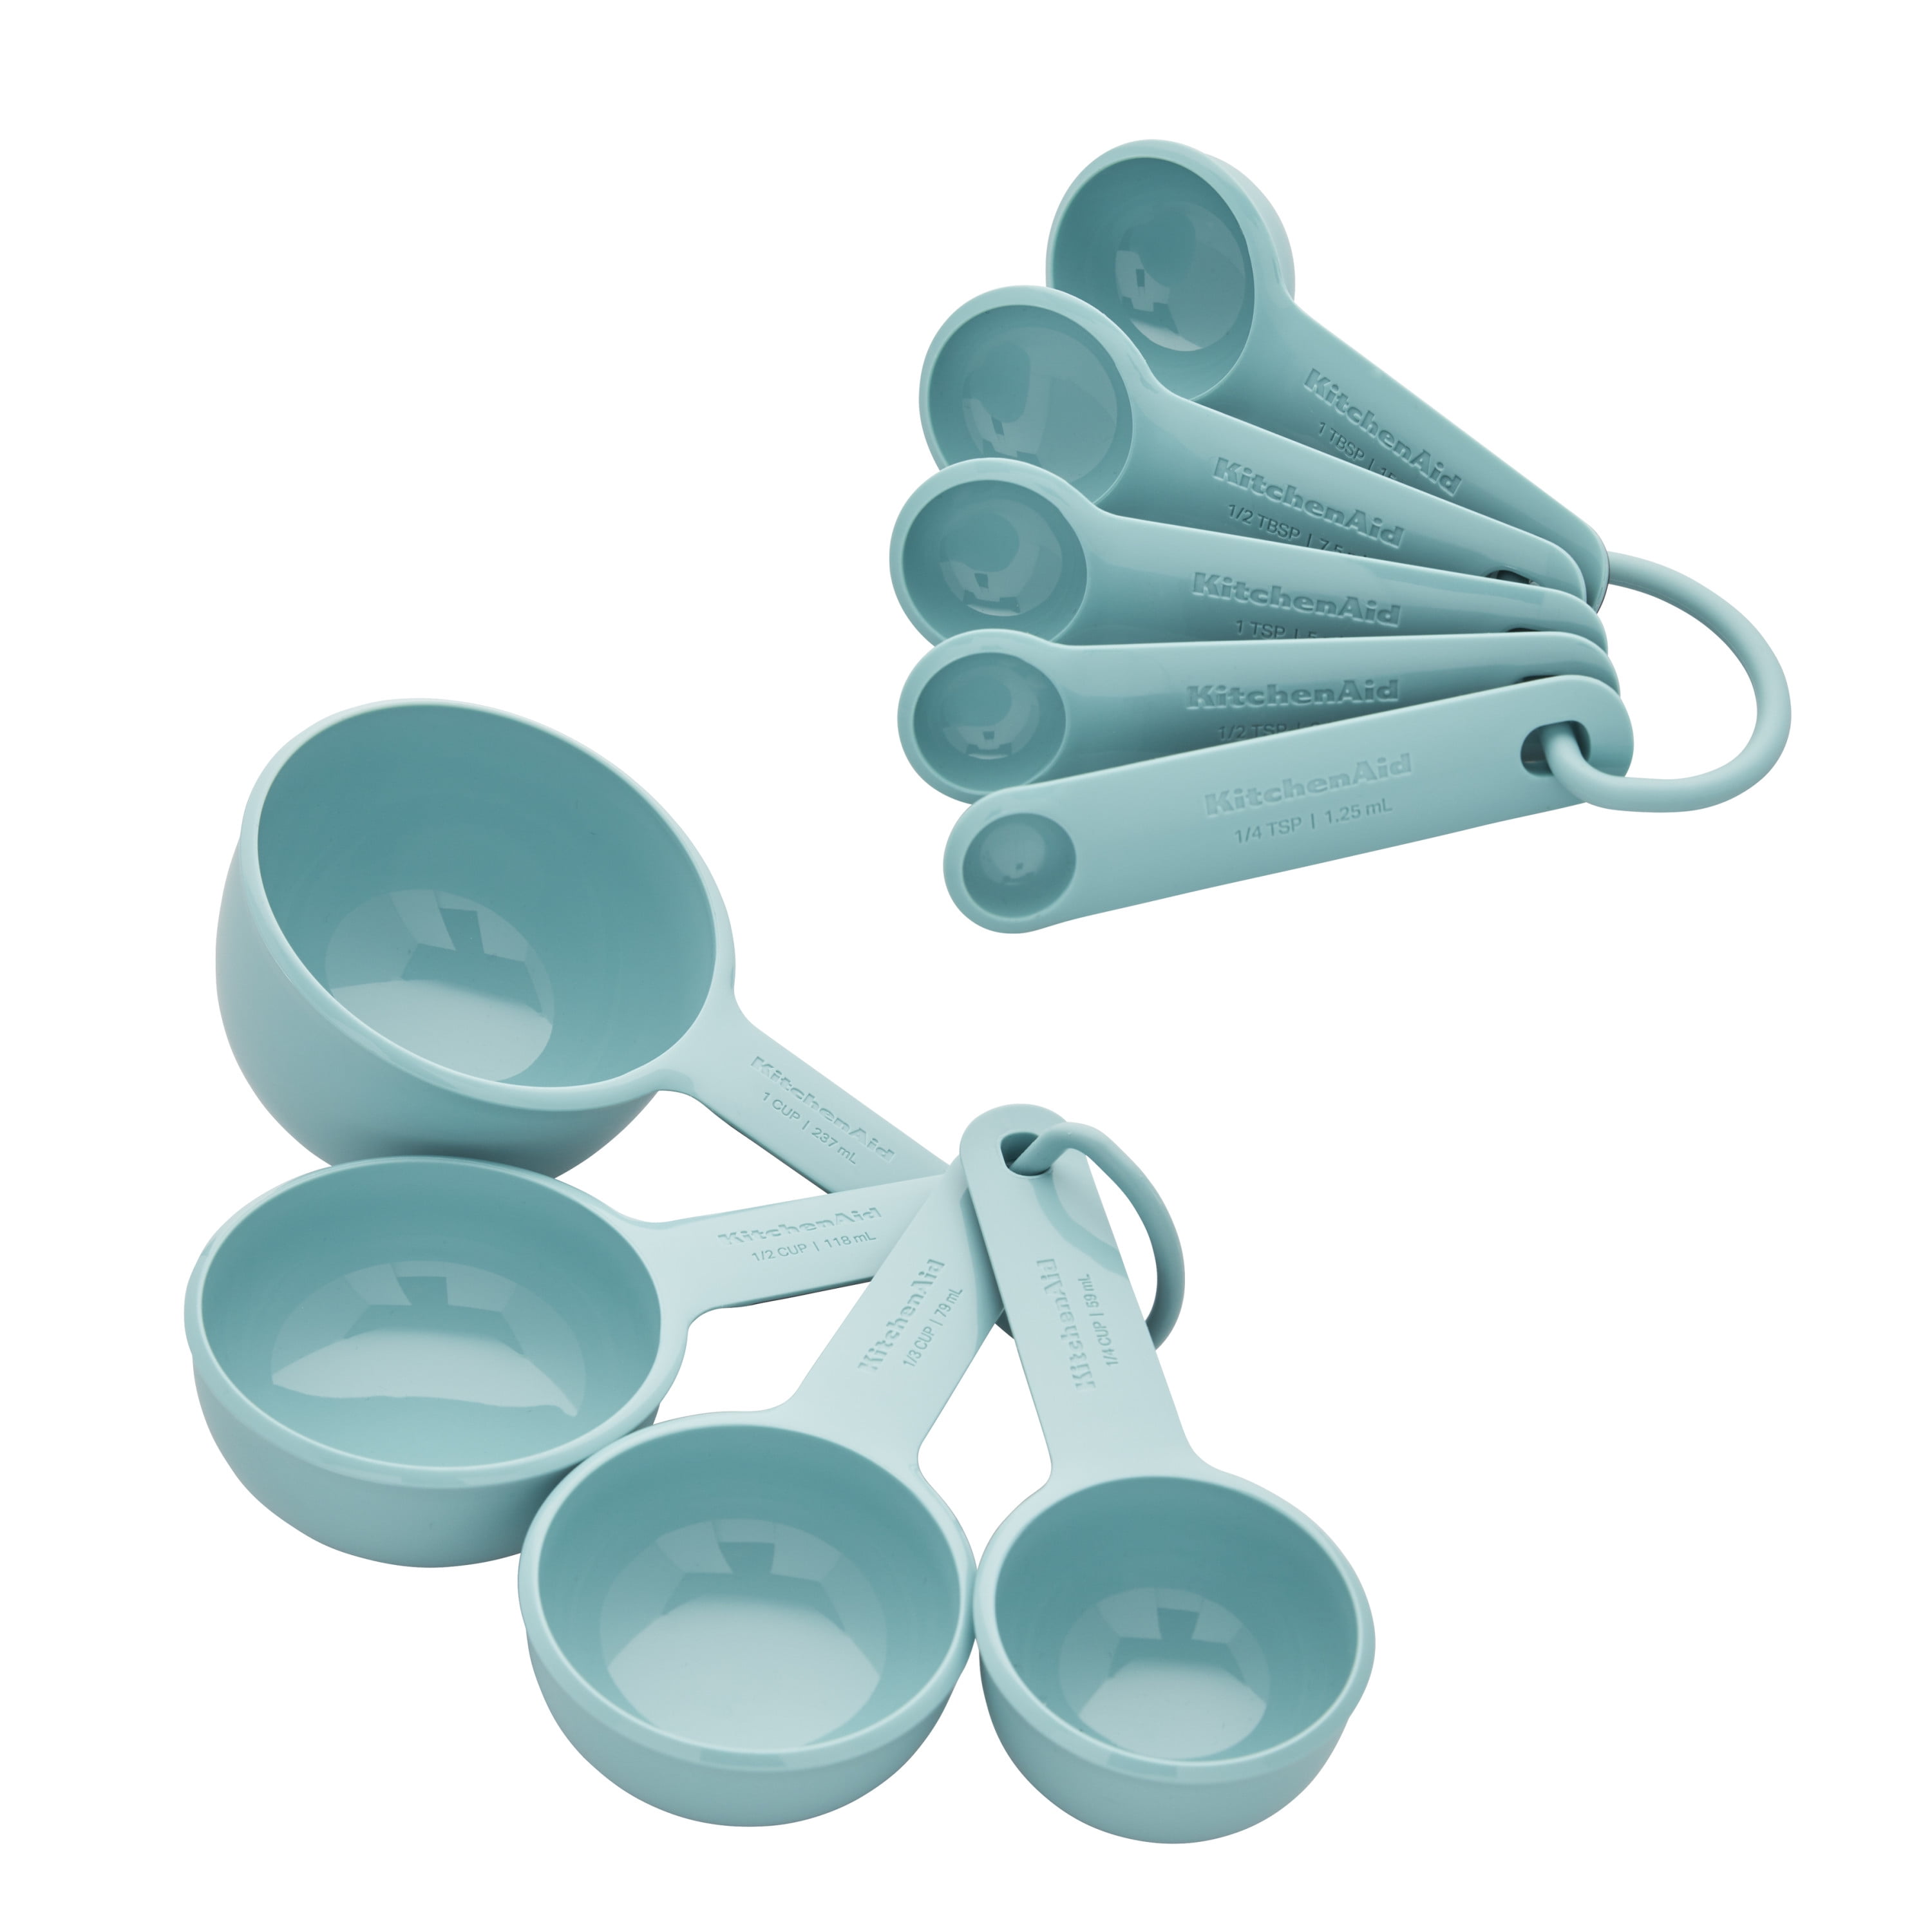 KtichenAid® Red Measuring Cups/Spoon Set, 1 ct - Fred Meyer